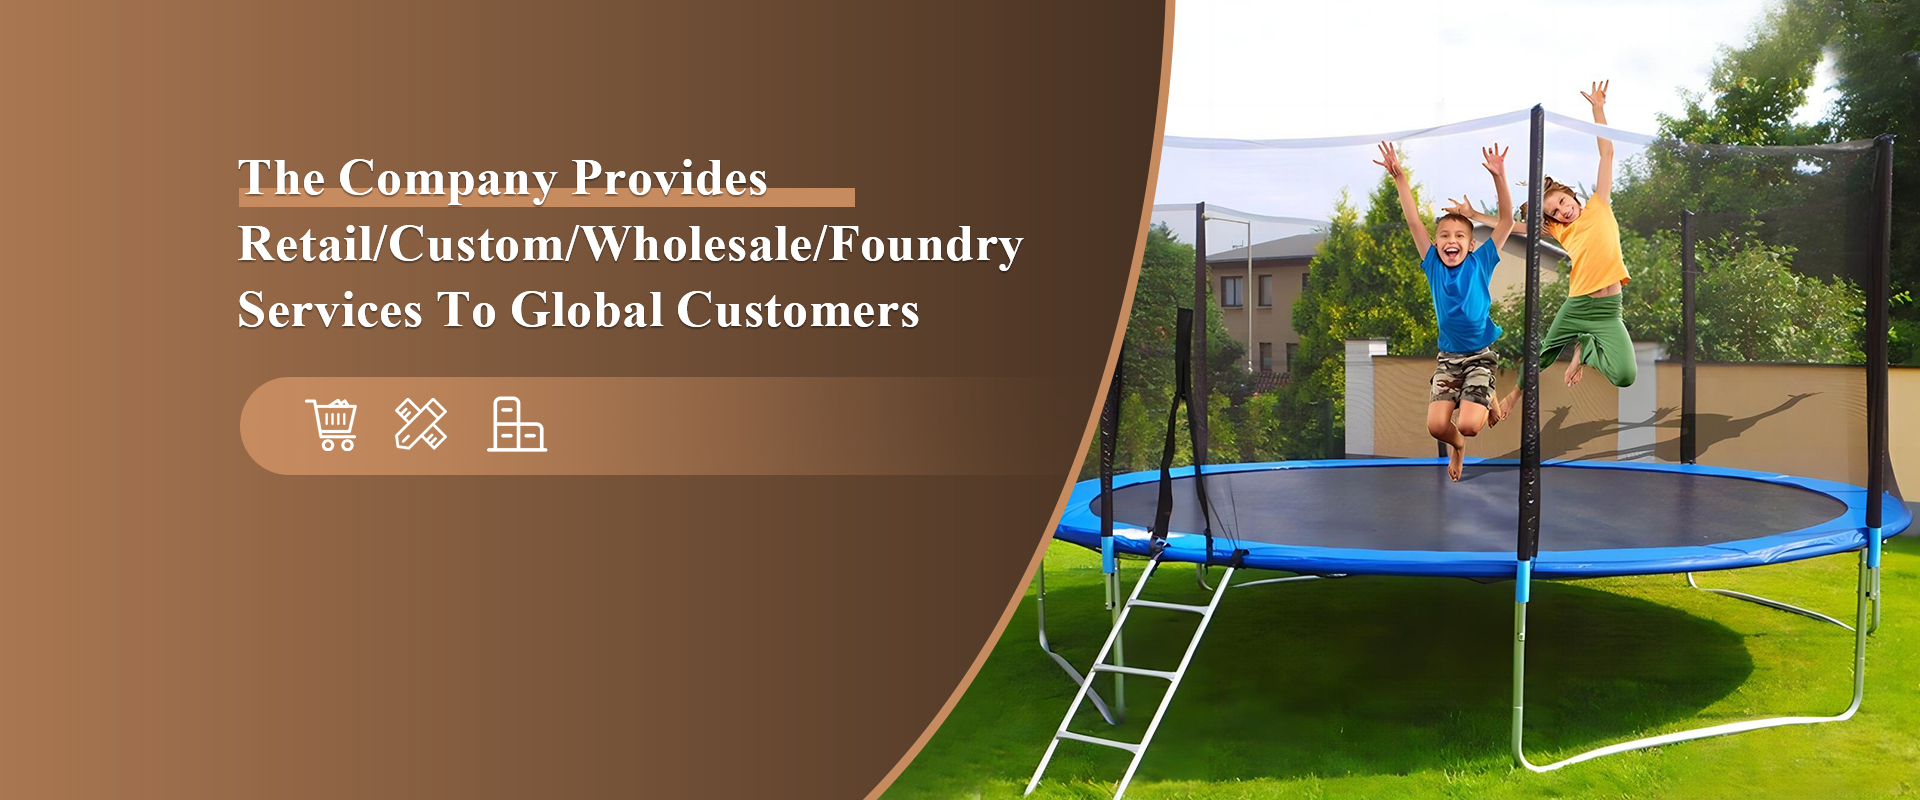 Retail/Custom/Wholesale/Foundry Services To Global Customers